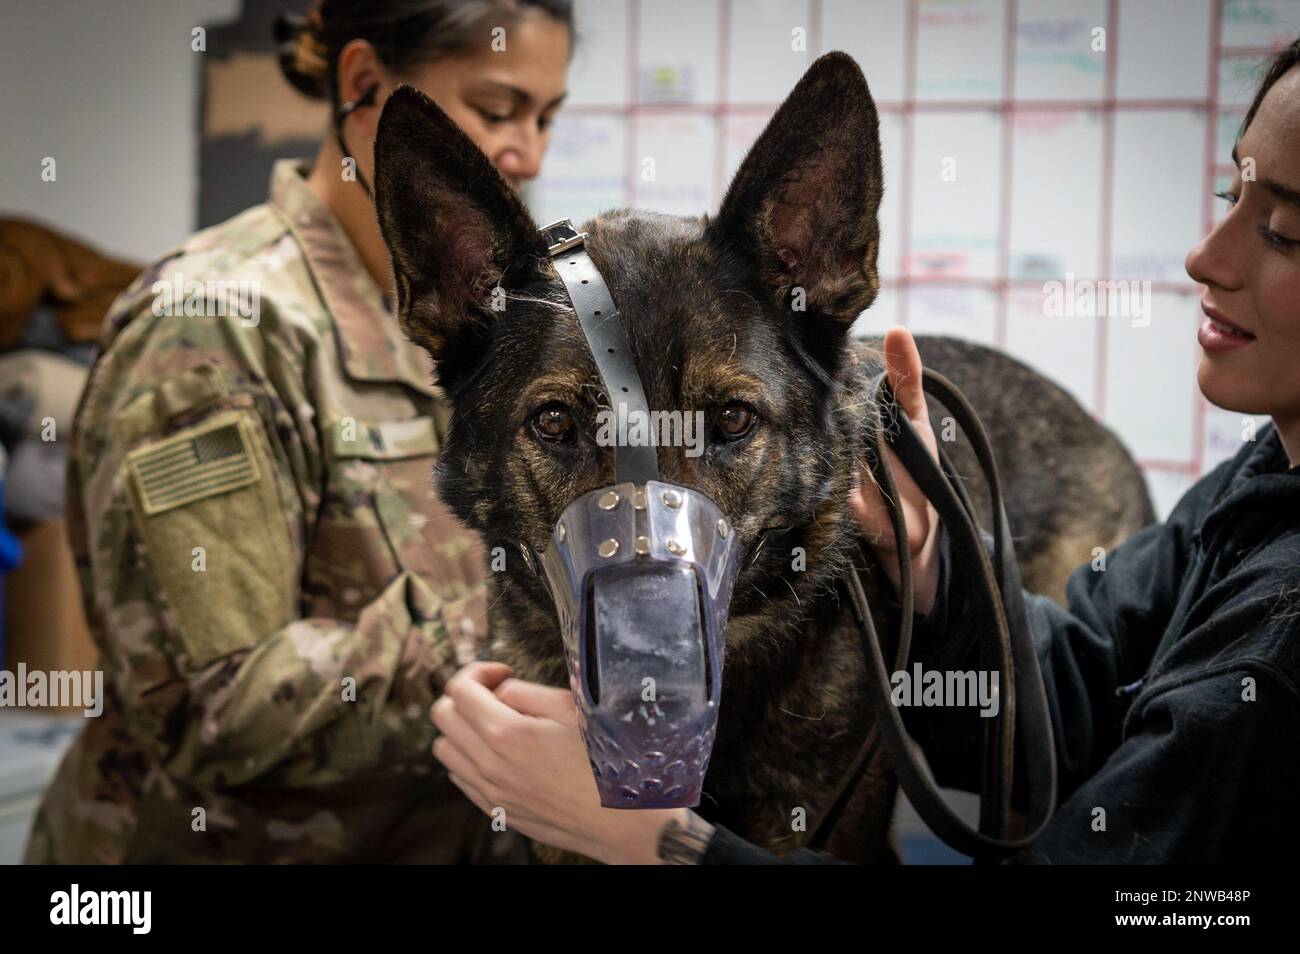 U.S. Army Capt. Leilani Im, a 109th Medical Detachment Veterinary Services veterinarian, performs a health certification on Noryk, 226th Military Police Detachment (Military Working Dog), at Ali Al Salem Air Base, Kuwait, Jan. 17, 2023. AASAB is a hub for sending MWDs in and out of United States Central Command’s area of responsibility, and they need to be medically cleared before leaving for their missions. Veterinary Services is responsible for providing health certifications and exams for all MWDs passing in and out of Kuwait. Stock Photo